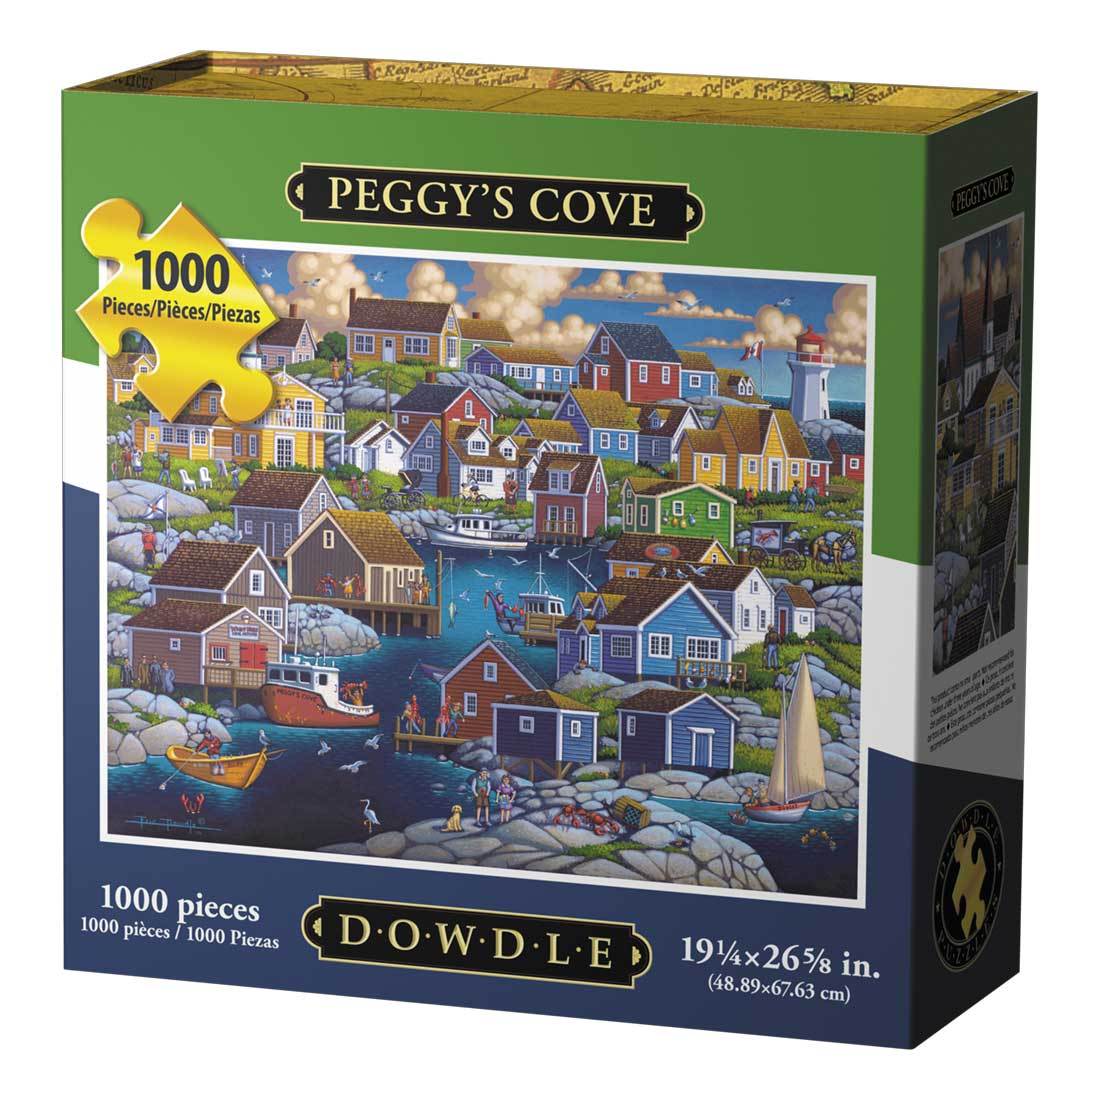 10274 19.25 X 26.6 In. Peggys Cove Jigsaw Puzzle - 1000 Piece